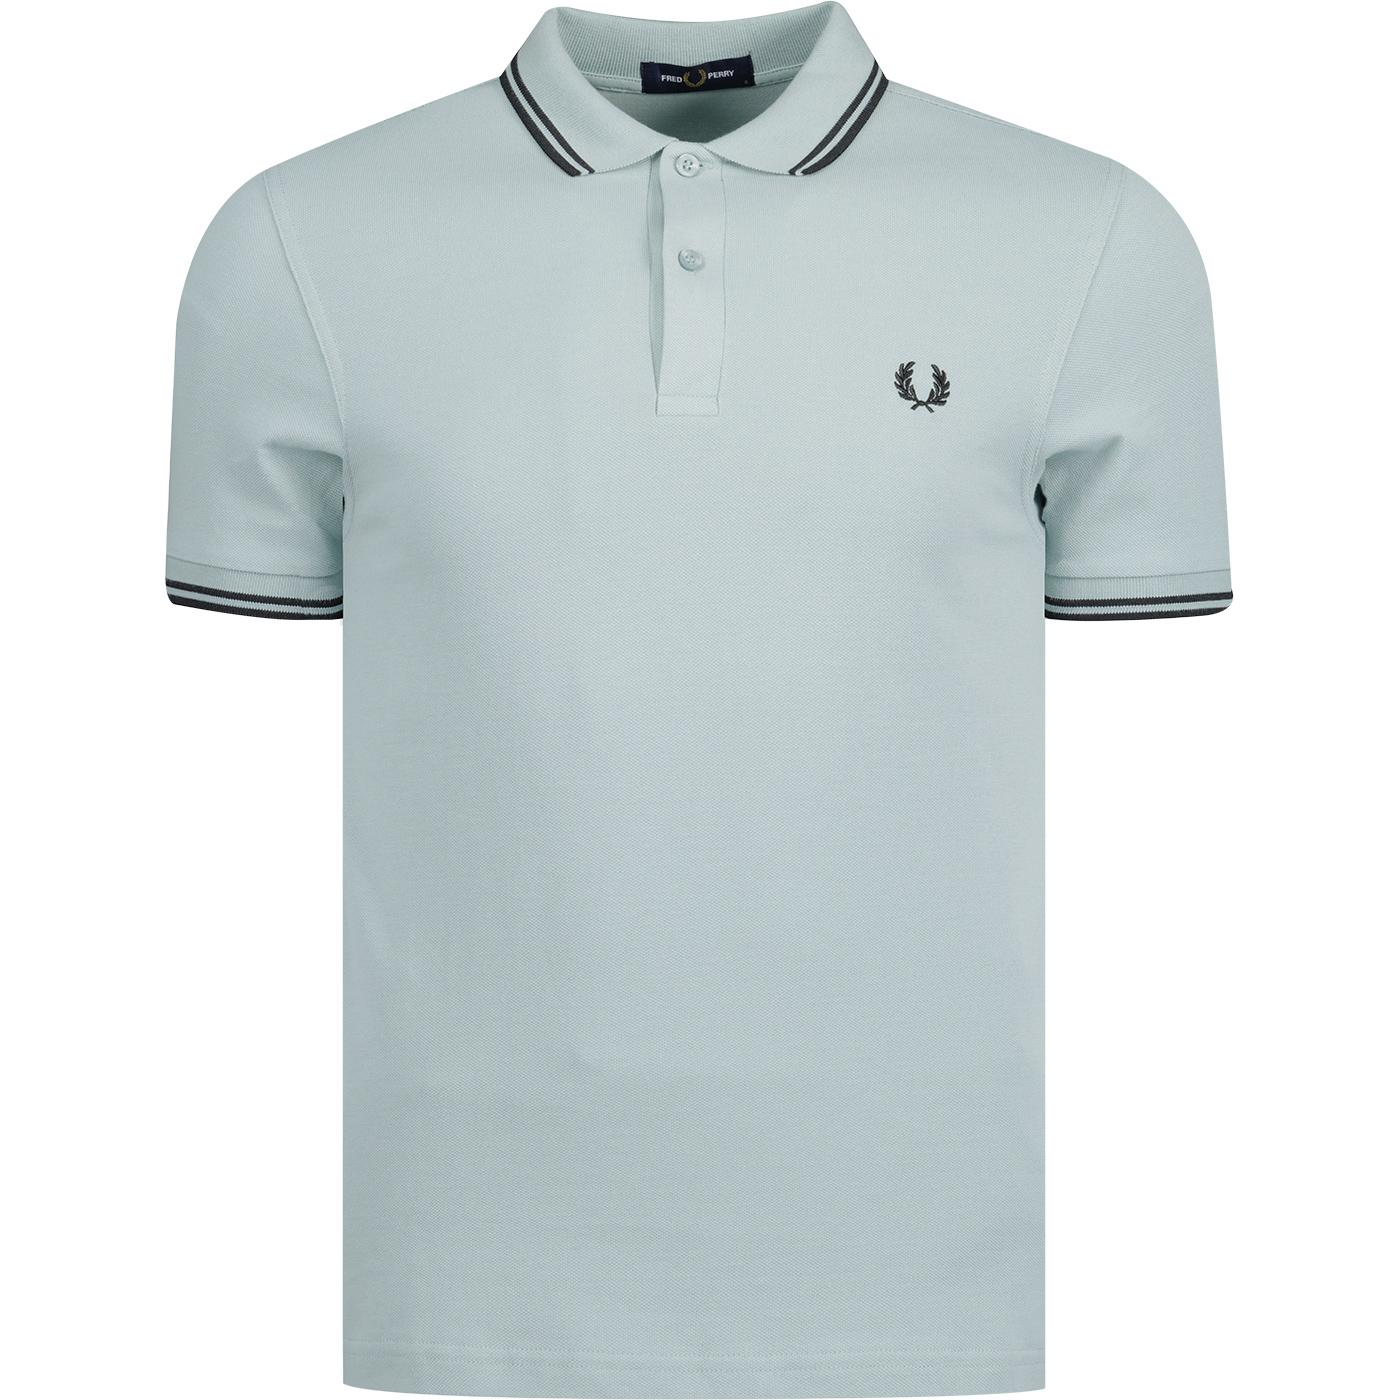 FRED PERRY M3600 Twin Tipped Mod Polo Top (SB/B)